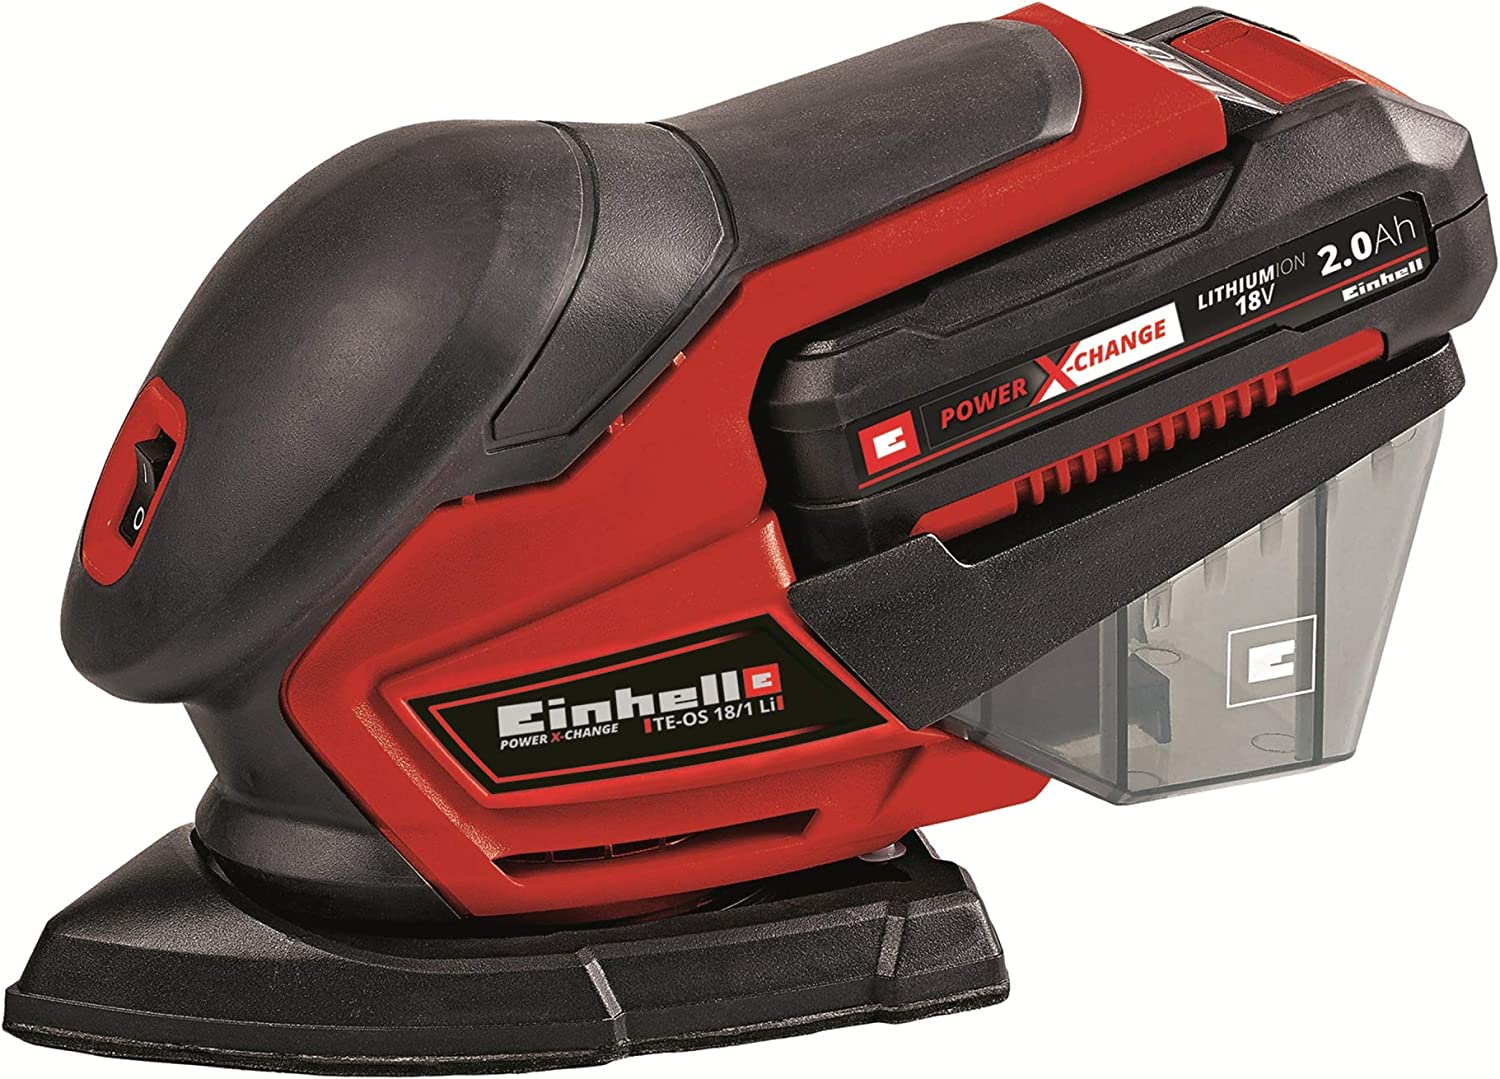 Einhell TE-CD Power X-Change 18-Volt Cordless Brushless 1/2-Inch Variable  Speed Drill/Driver, w/Adjustable 531 In-Lbs Torque, 1800 RPM Max